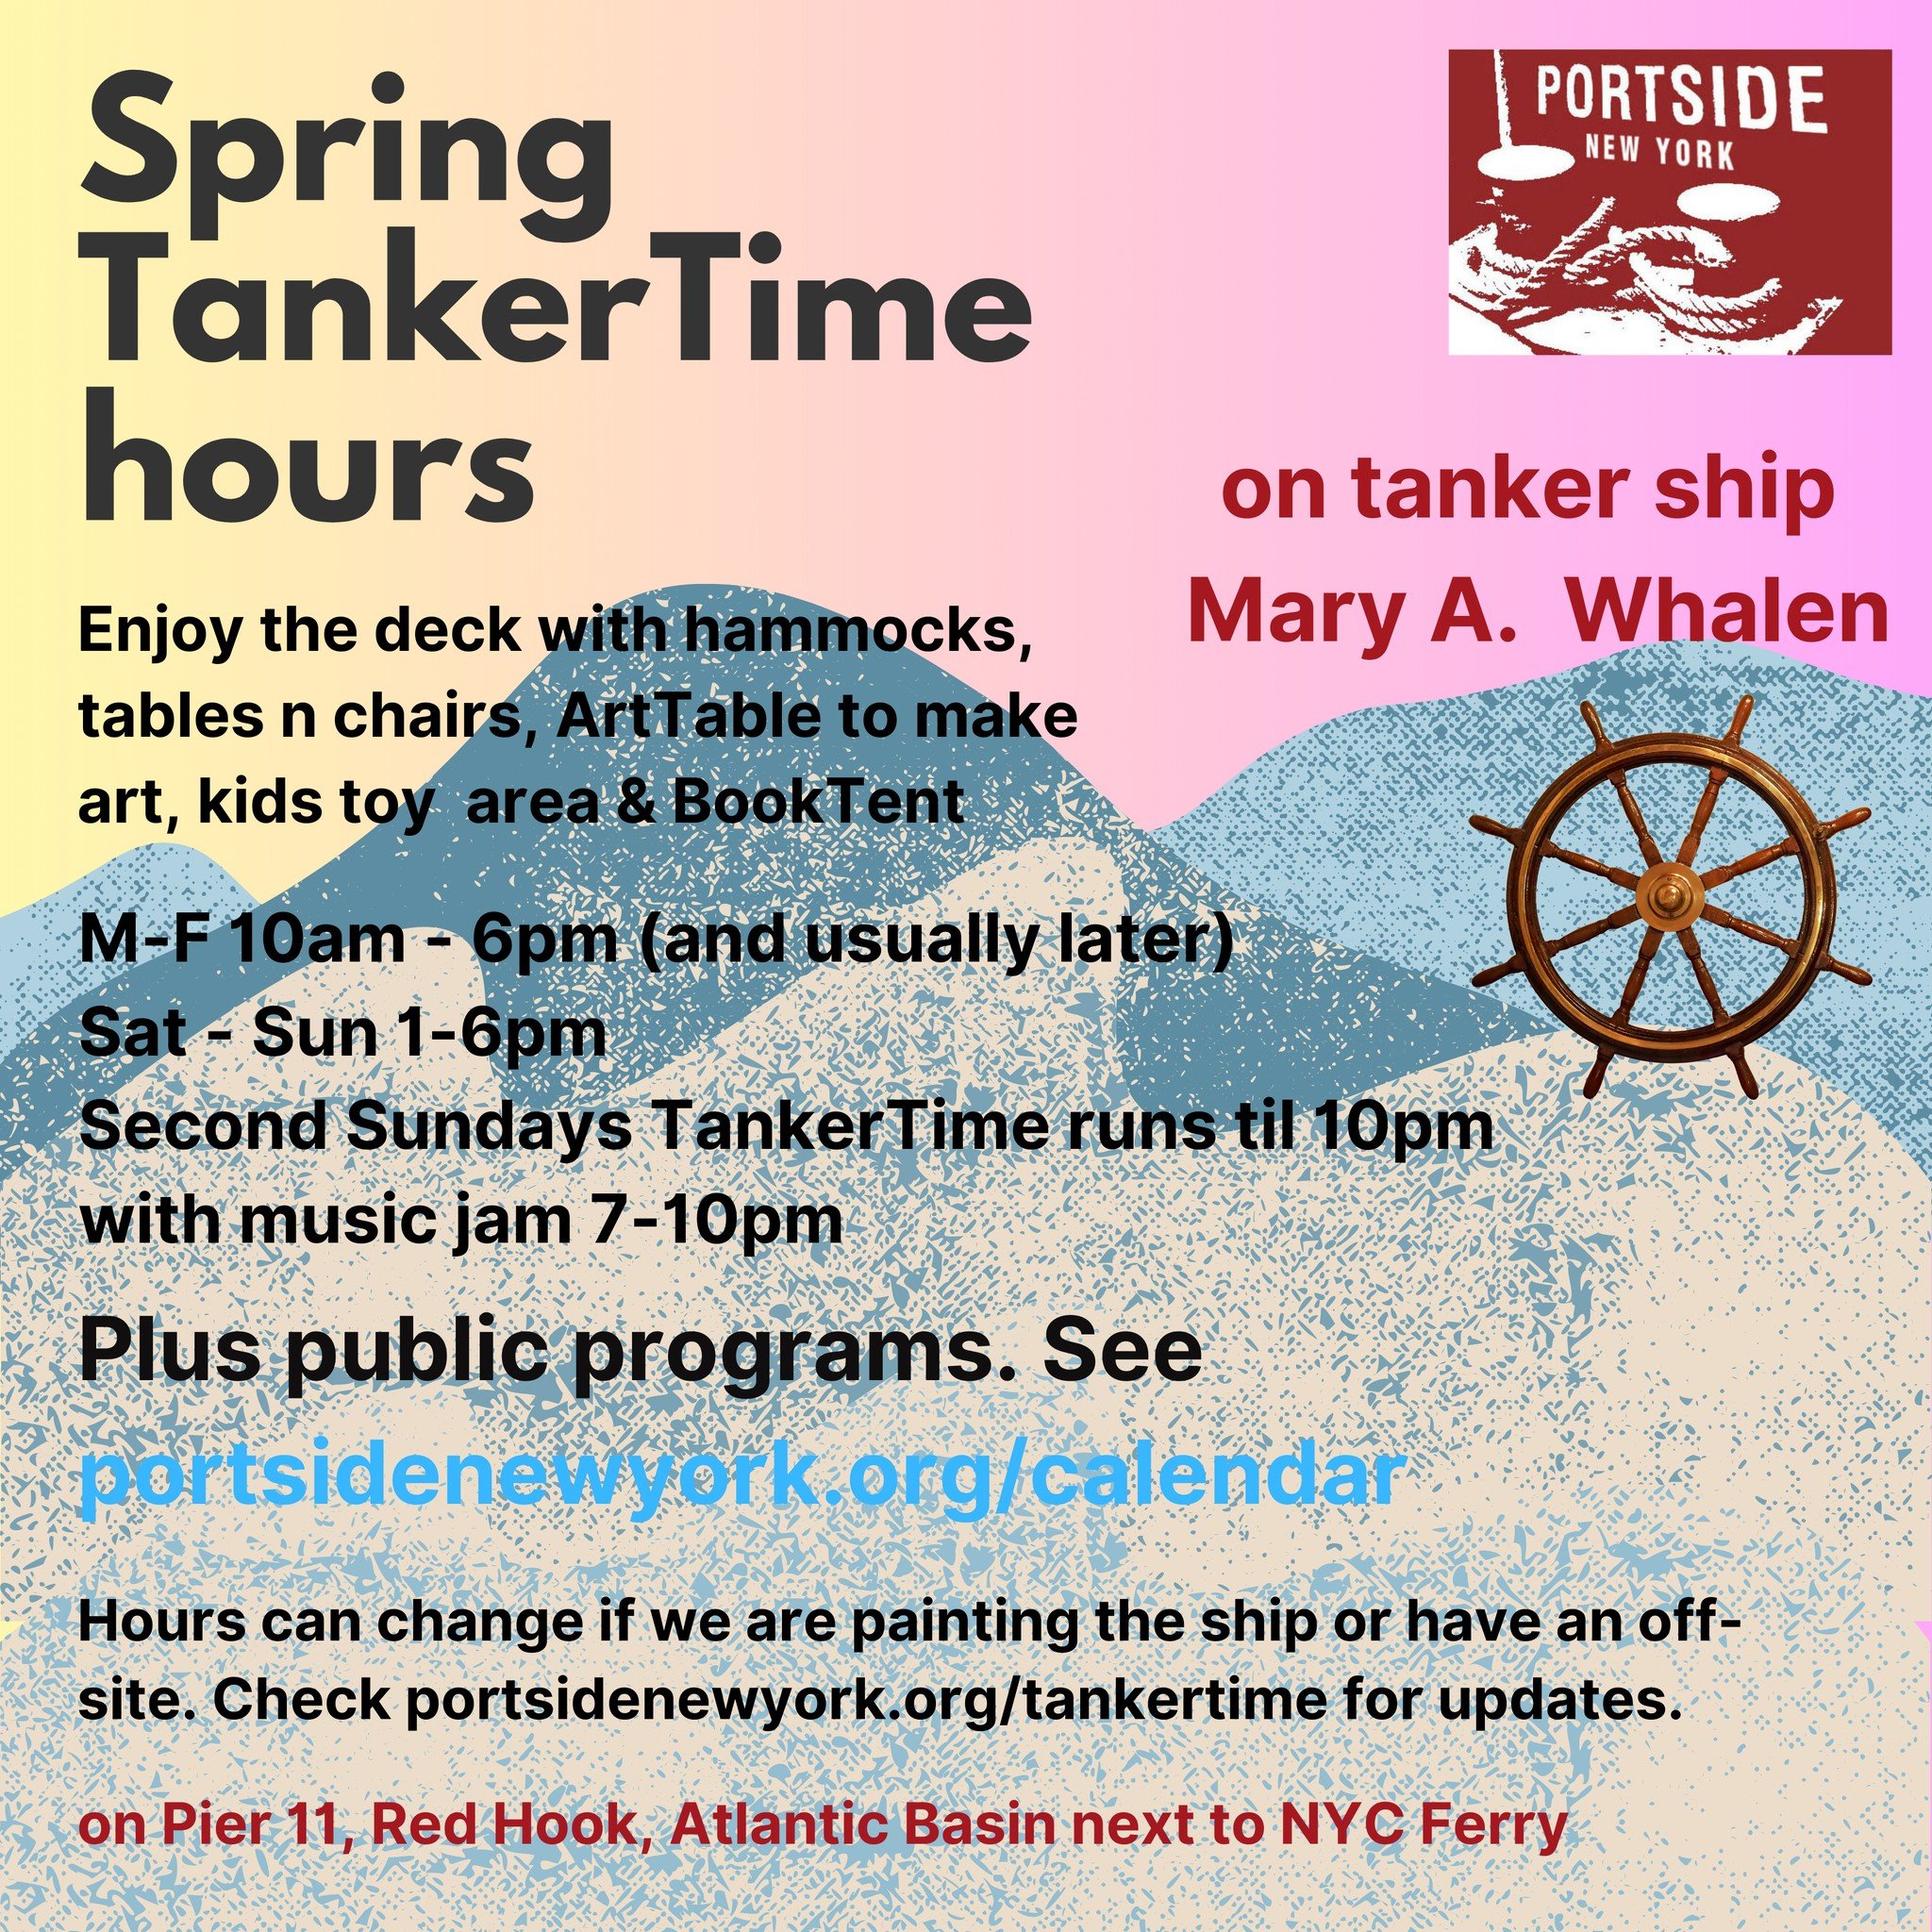 Spring TankerTime hours!  Early this week, look for the return of the free kids library in the BookTent and free ArtTable with supplies to make art. Kiddie pool comes out at 80+ degrees.
On tanker #MaryWhalen in Atlantic Basin #RedHook next to NYC Fe